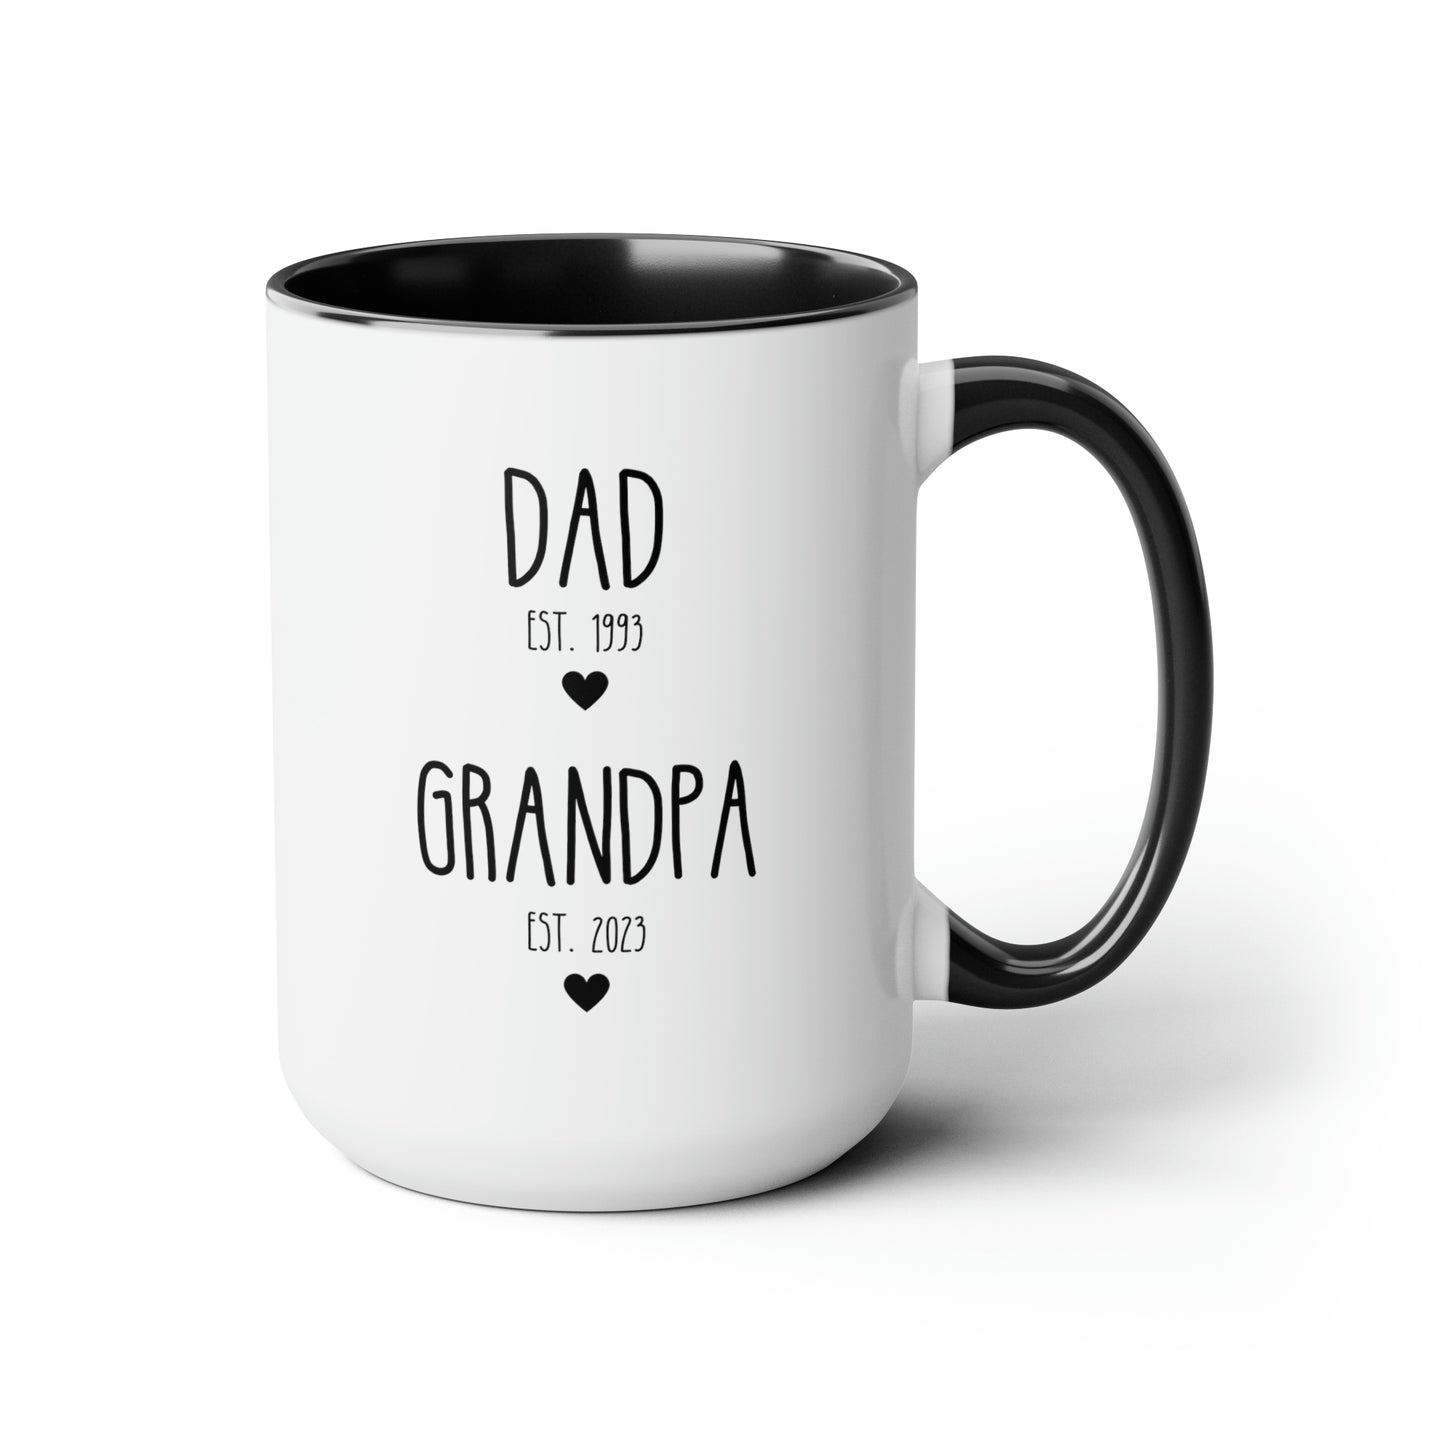 Dad Est Grandpa Est 15oz white with black accent funny large coffee mug gift for new grandpa first time grandfather pregnancy announcement custom date customize personalize waveywares wavey wares wavywares wavy wares